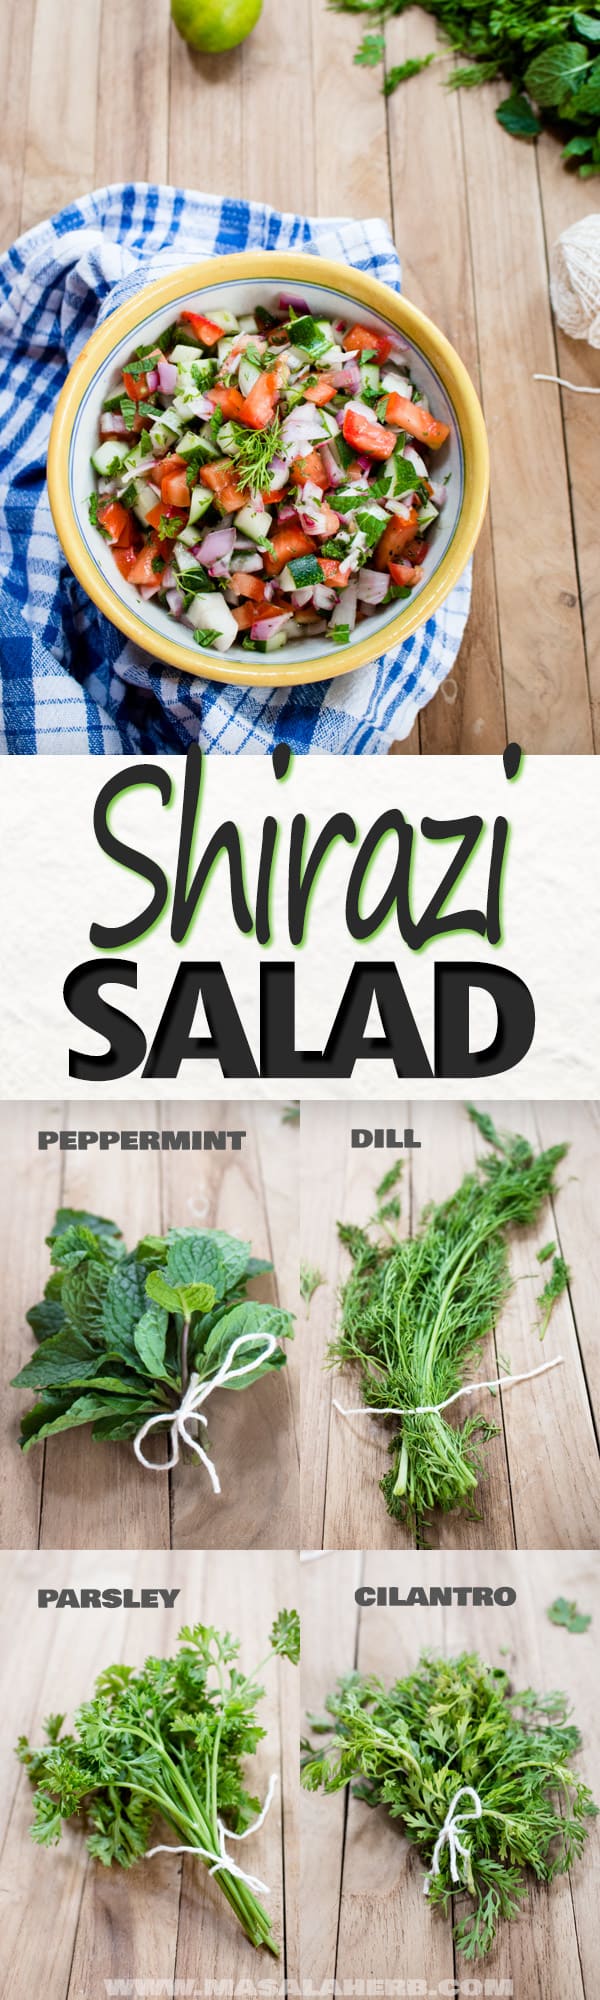 Easy Shirazi Salad - Refreshing Persian Salad Recipe - cucumber, tomato, onion and fresh herbs makes this salad with a light tart dressing a refreshing side dish during the hot summer days. Serve with meat kebabs, bbq, steak, pilaf, flat bread. www.MasalaHerb.com #salad #persian #herbs